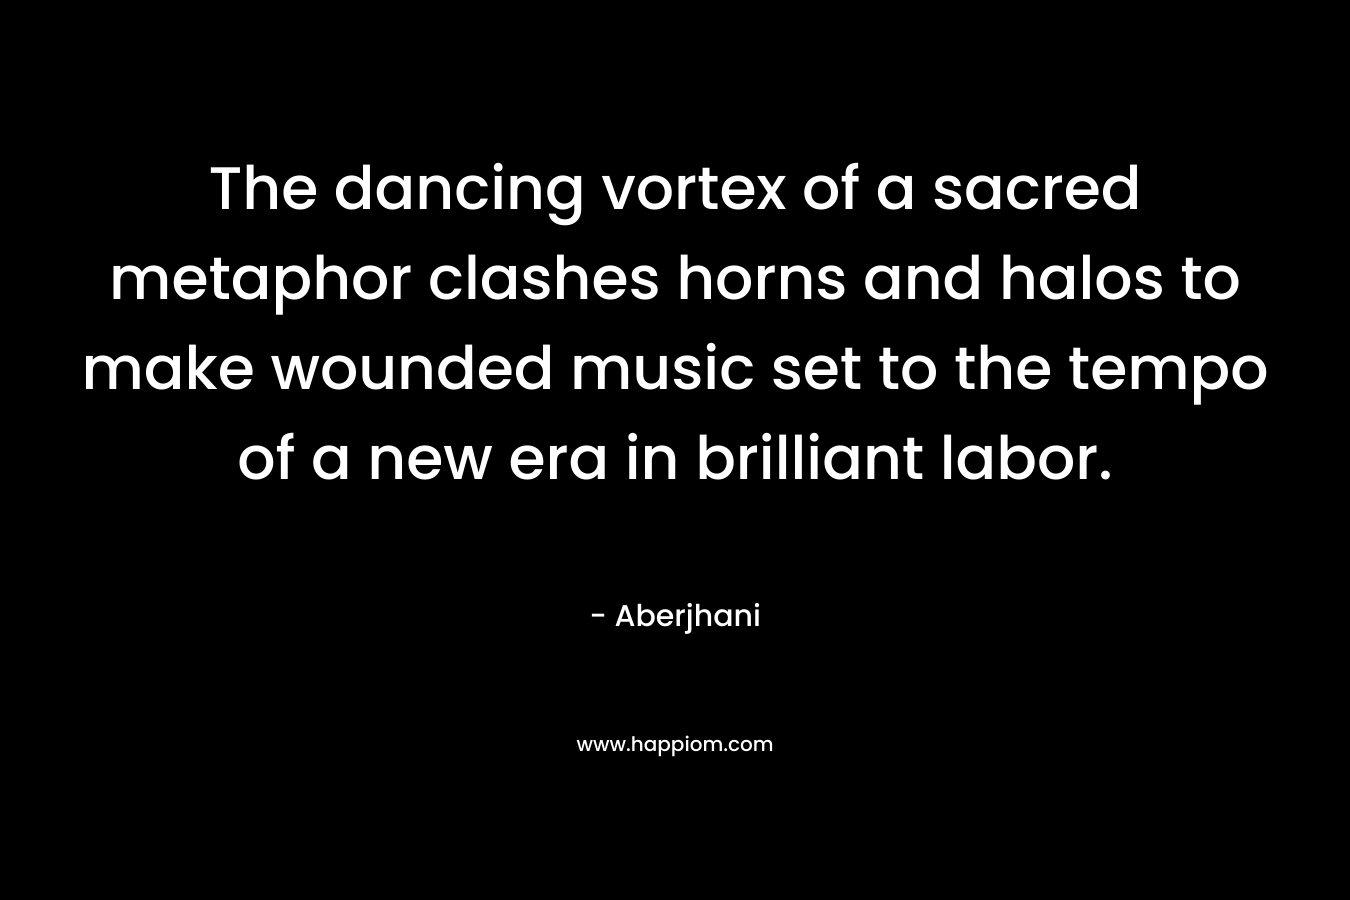 The dancing vortex of a sacred metaphor clashes horns and halos to make wounded music set to the tempo of a new era in brilliant labor.